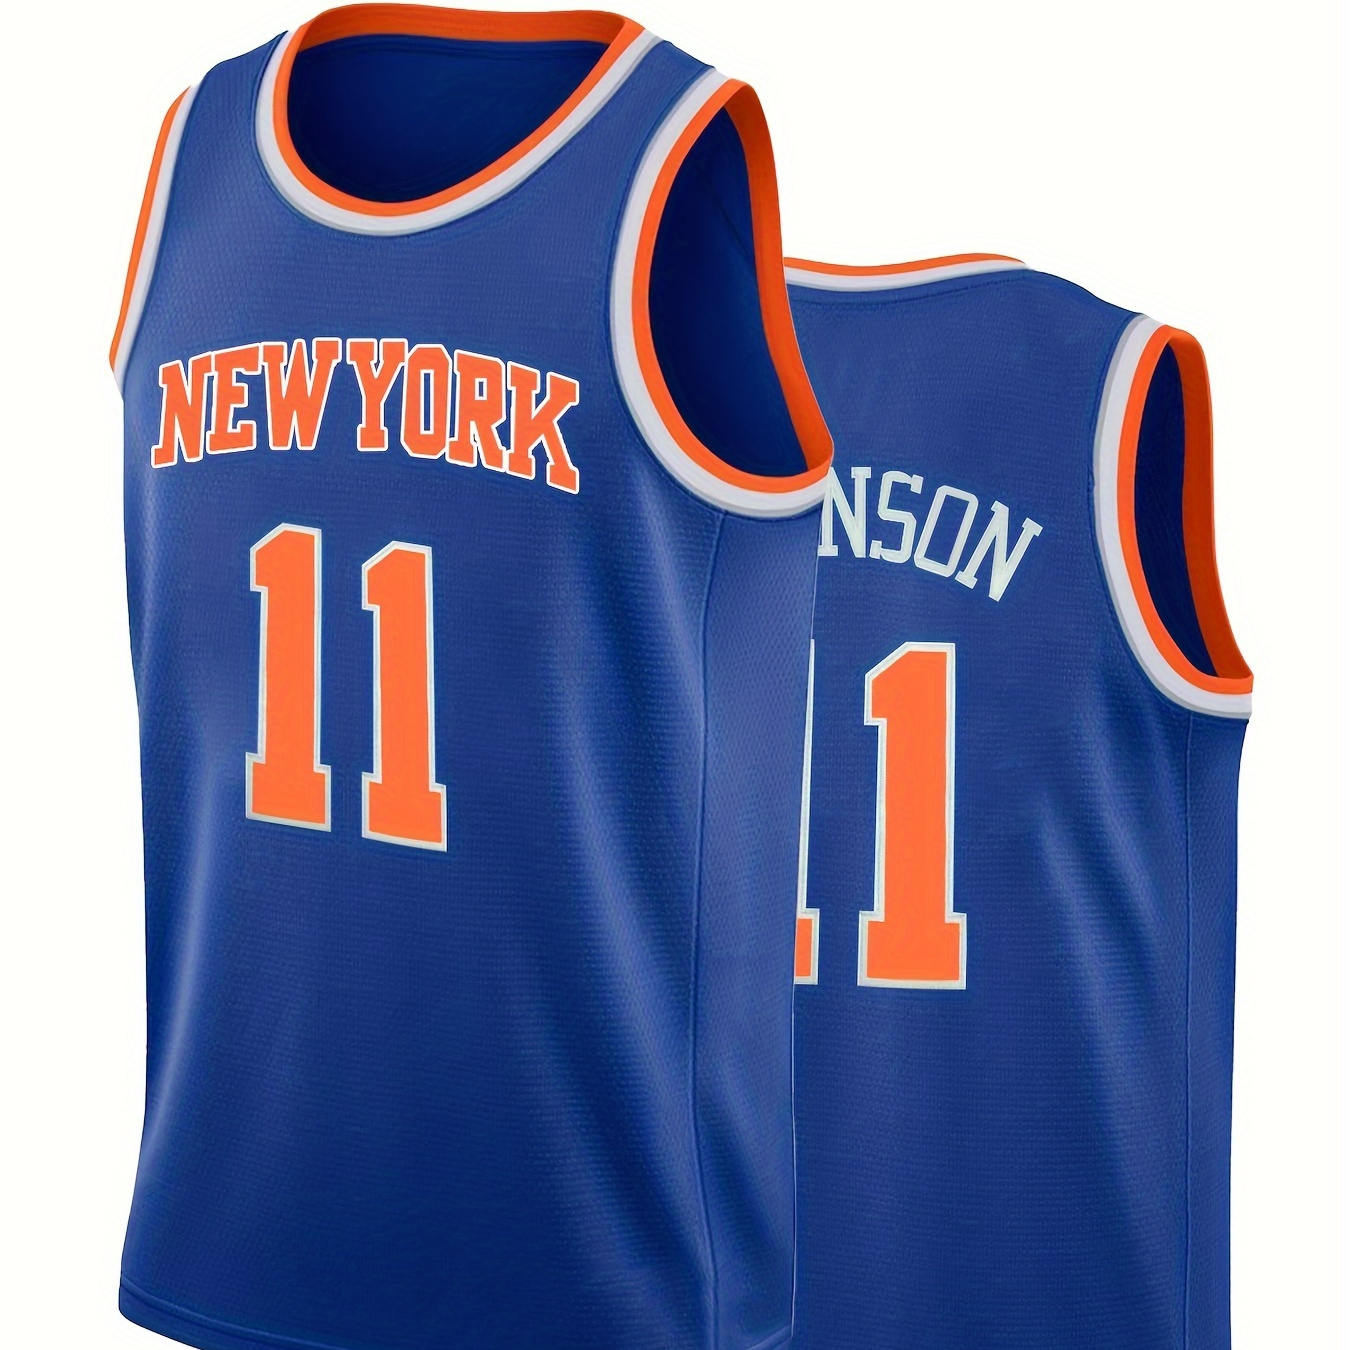 

Men's New York #11 Jersey Tank Top, Match Party Training Clothing For Males